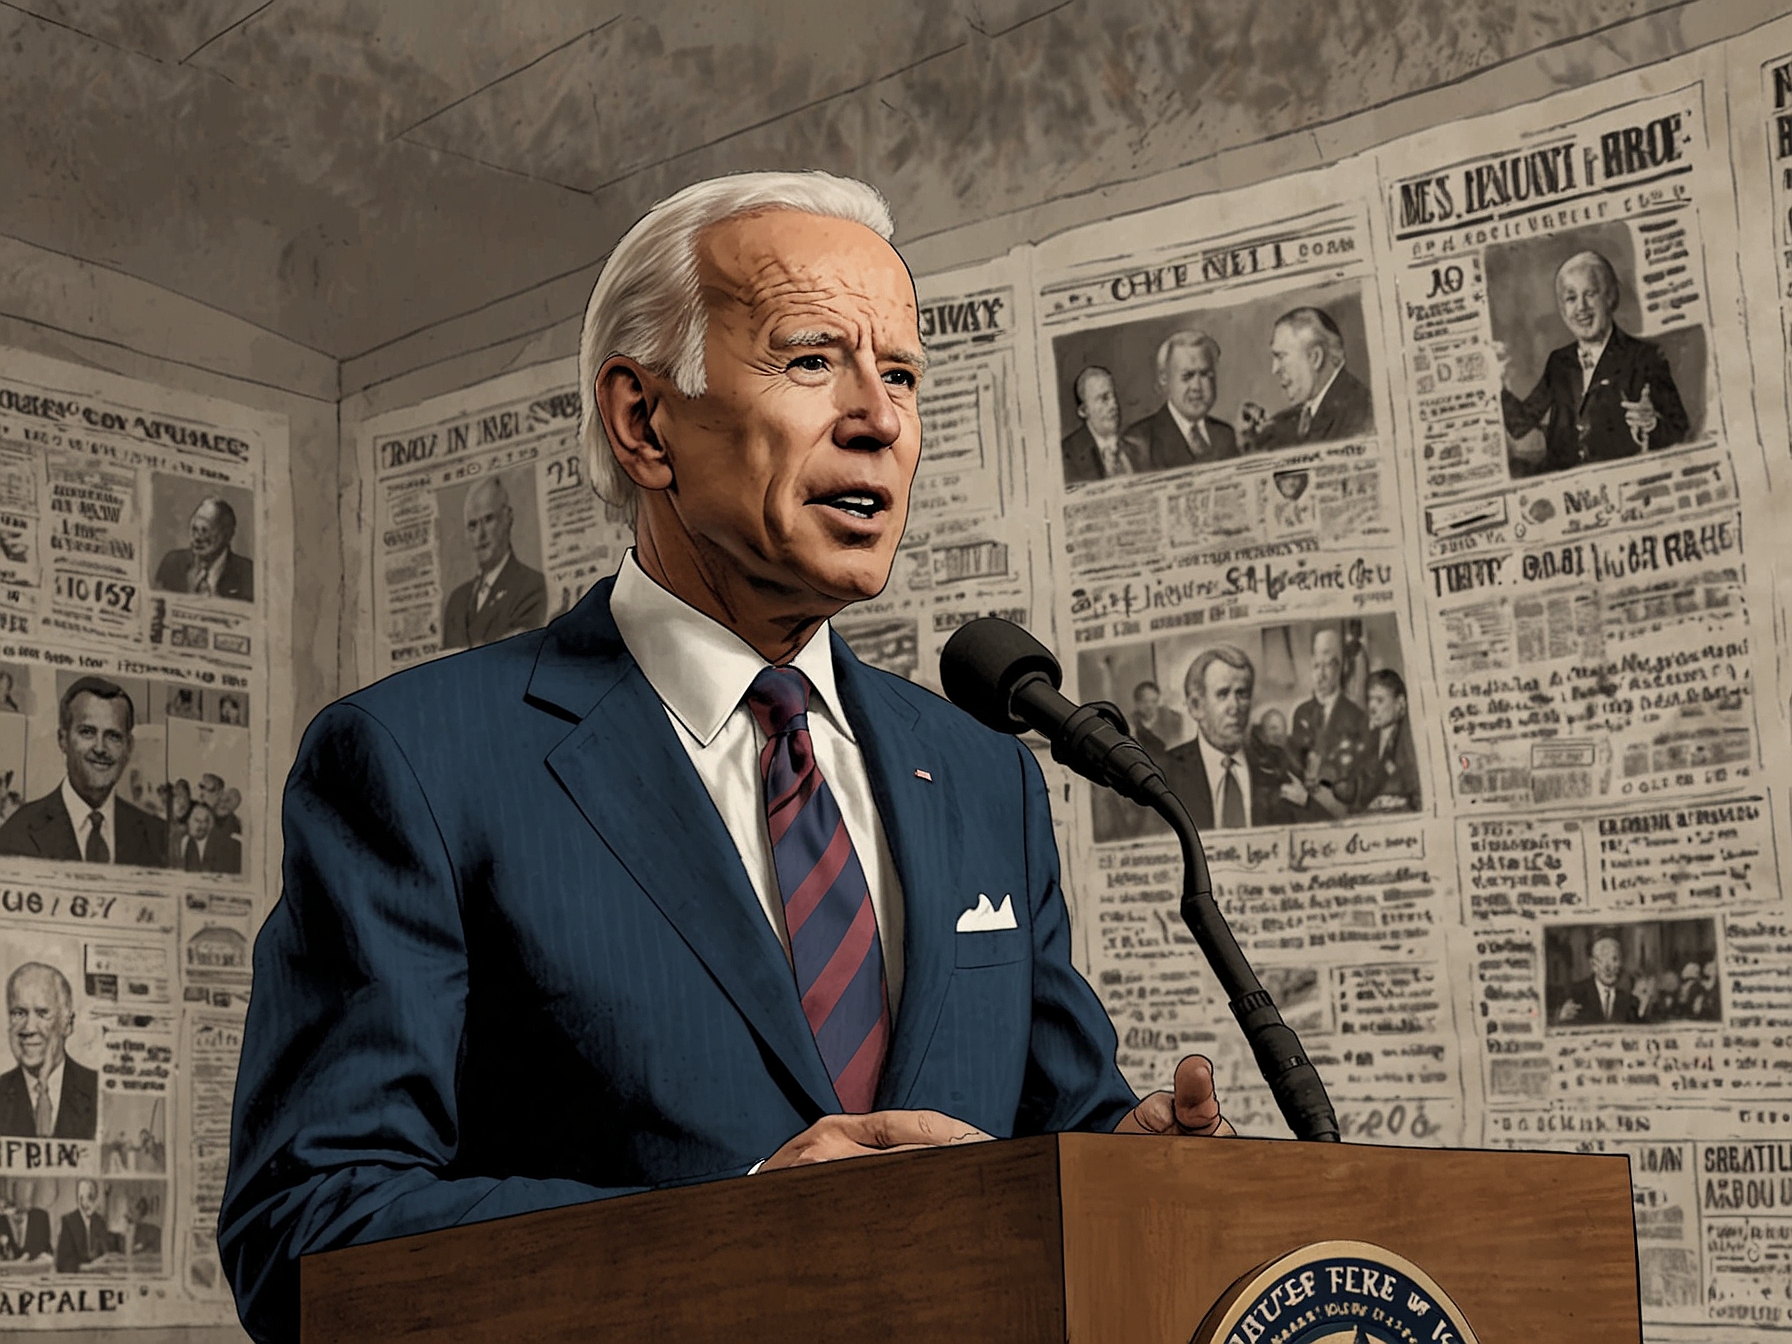 An illustration showing President Joe Biden delivering a speech, with a backdrop of conflicting news headlines, emphasizing the media's role in shaping public opinion.